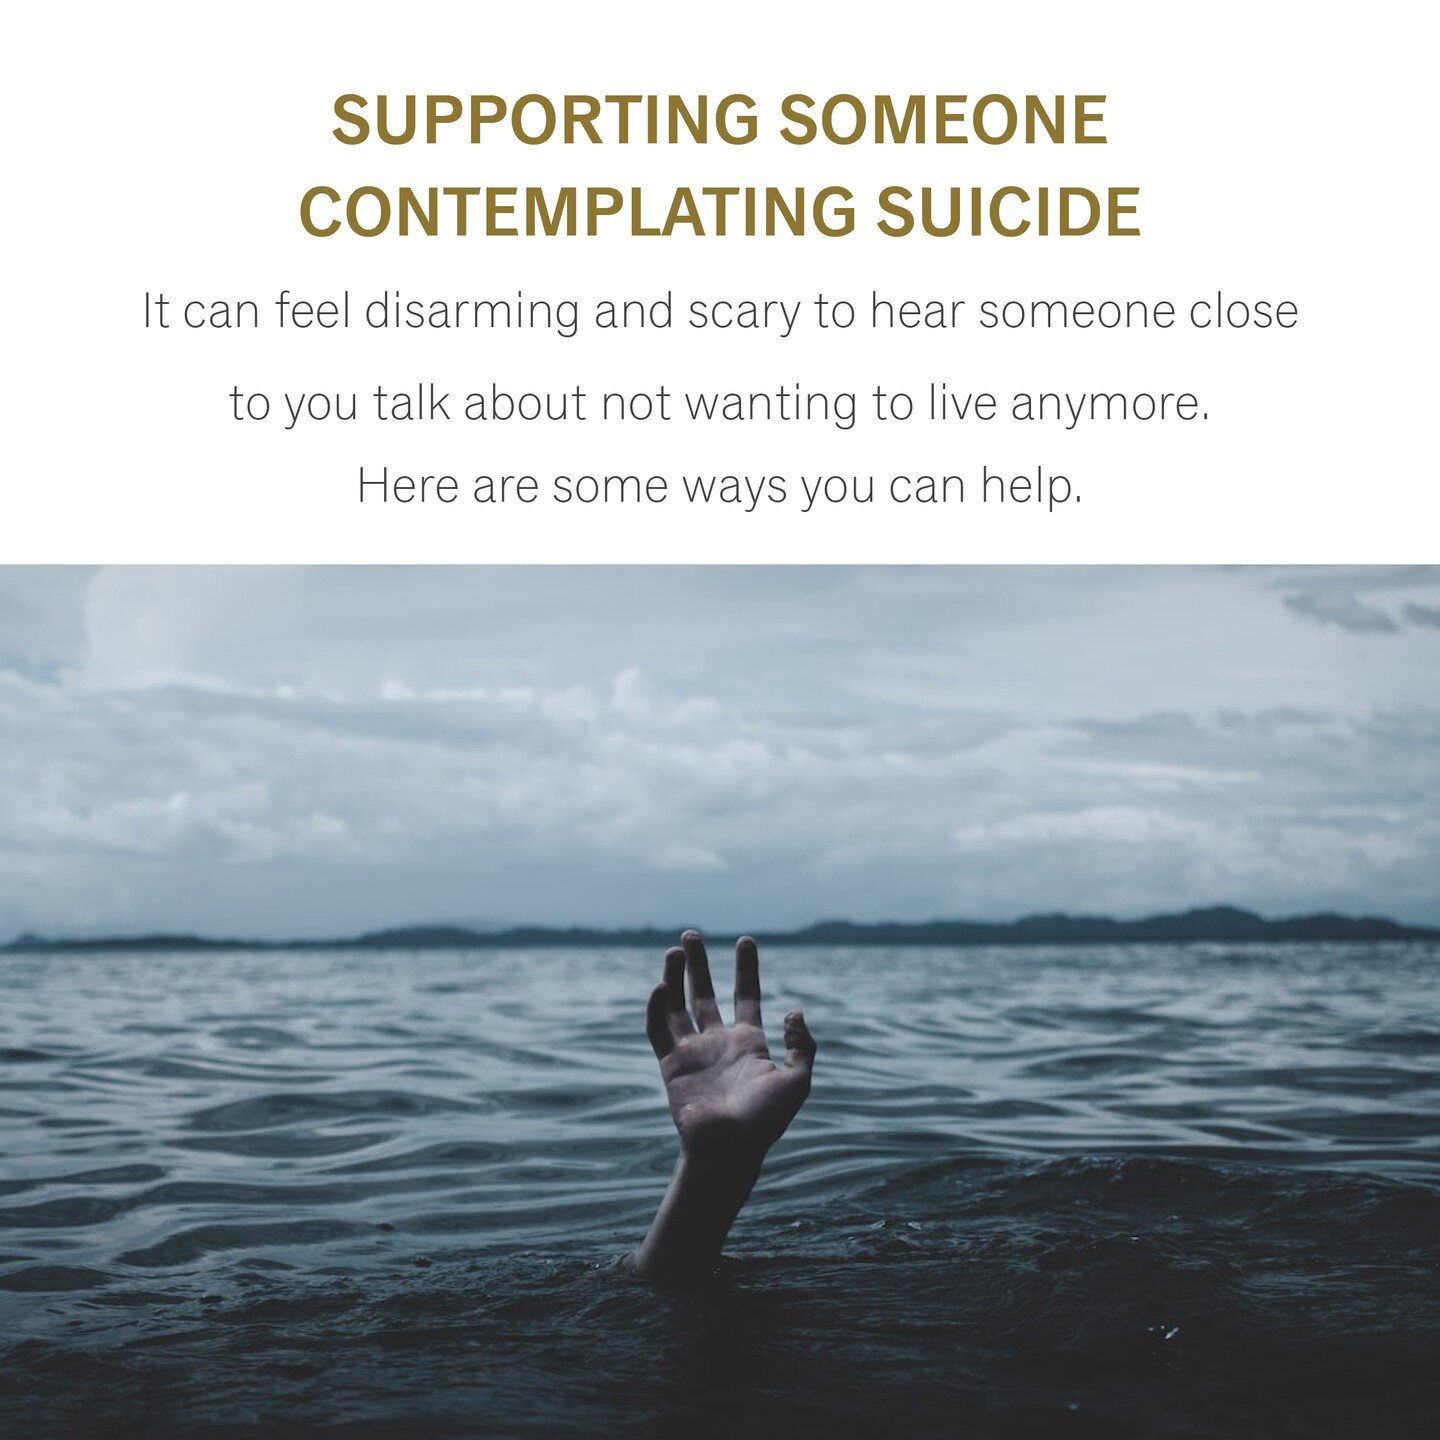 When someone you know and love is struggling with suicidal thoughts or plans, it can be really tough to know how to cope. Here are some things to think about.

#suicideprevention #mentalhealth #counseling #therapy #tindrumtherapy #support